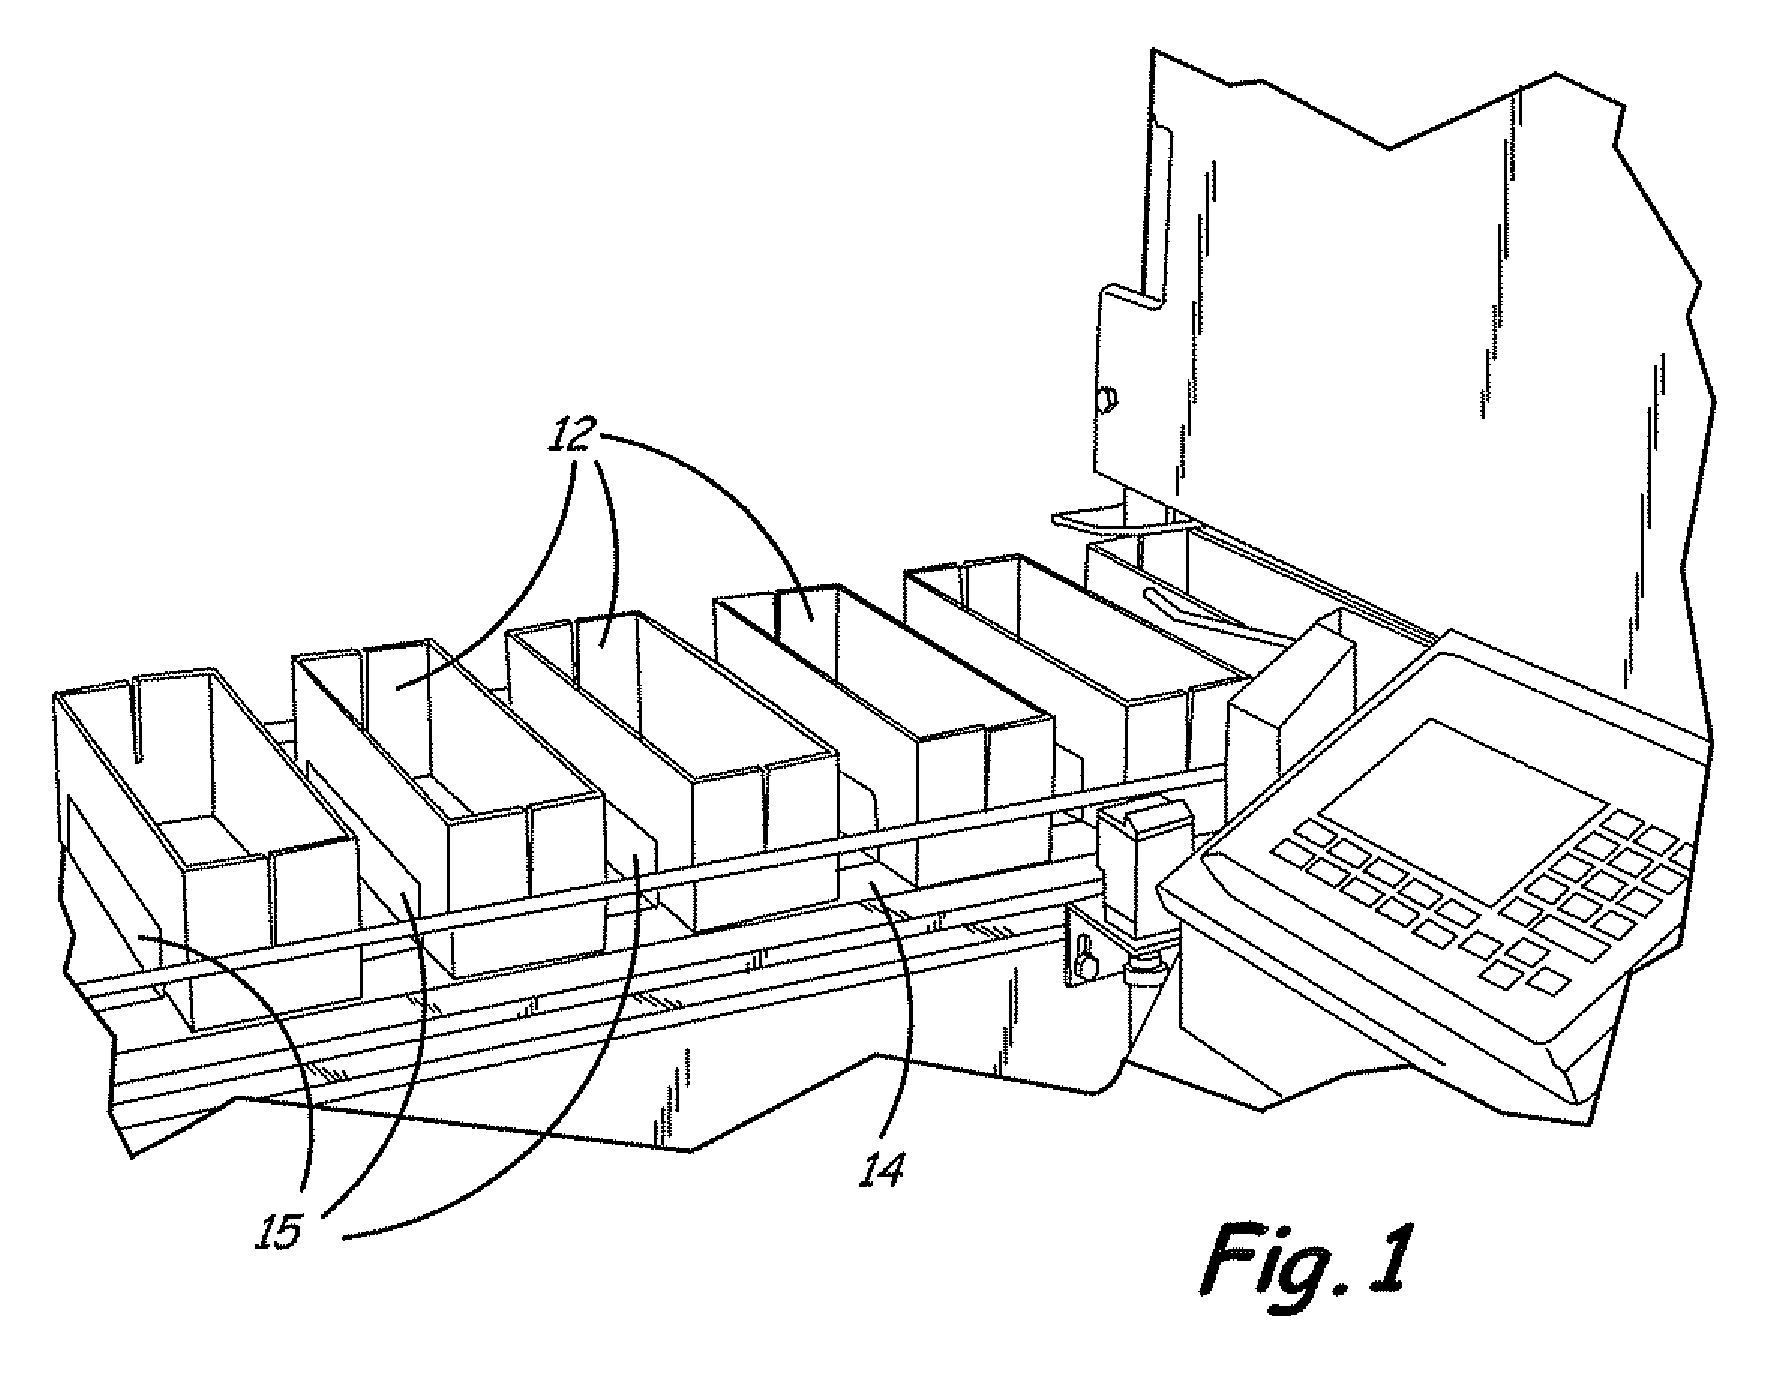 Method of lap sealing a molten cheese product with non-wax film